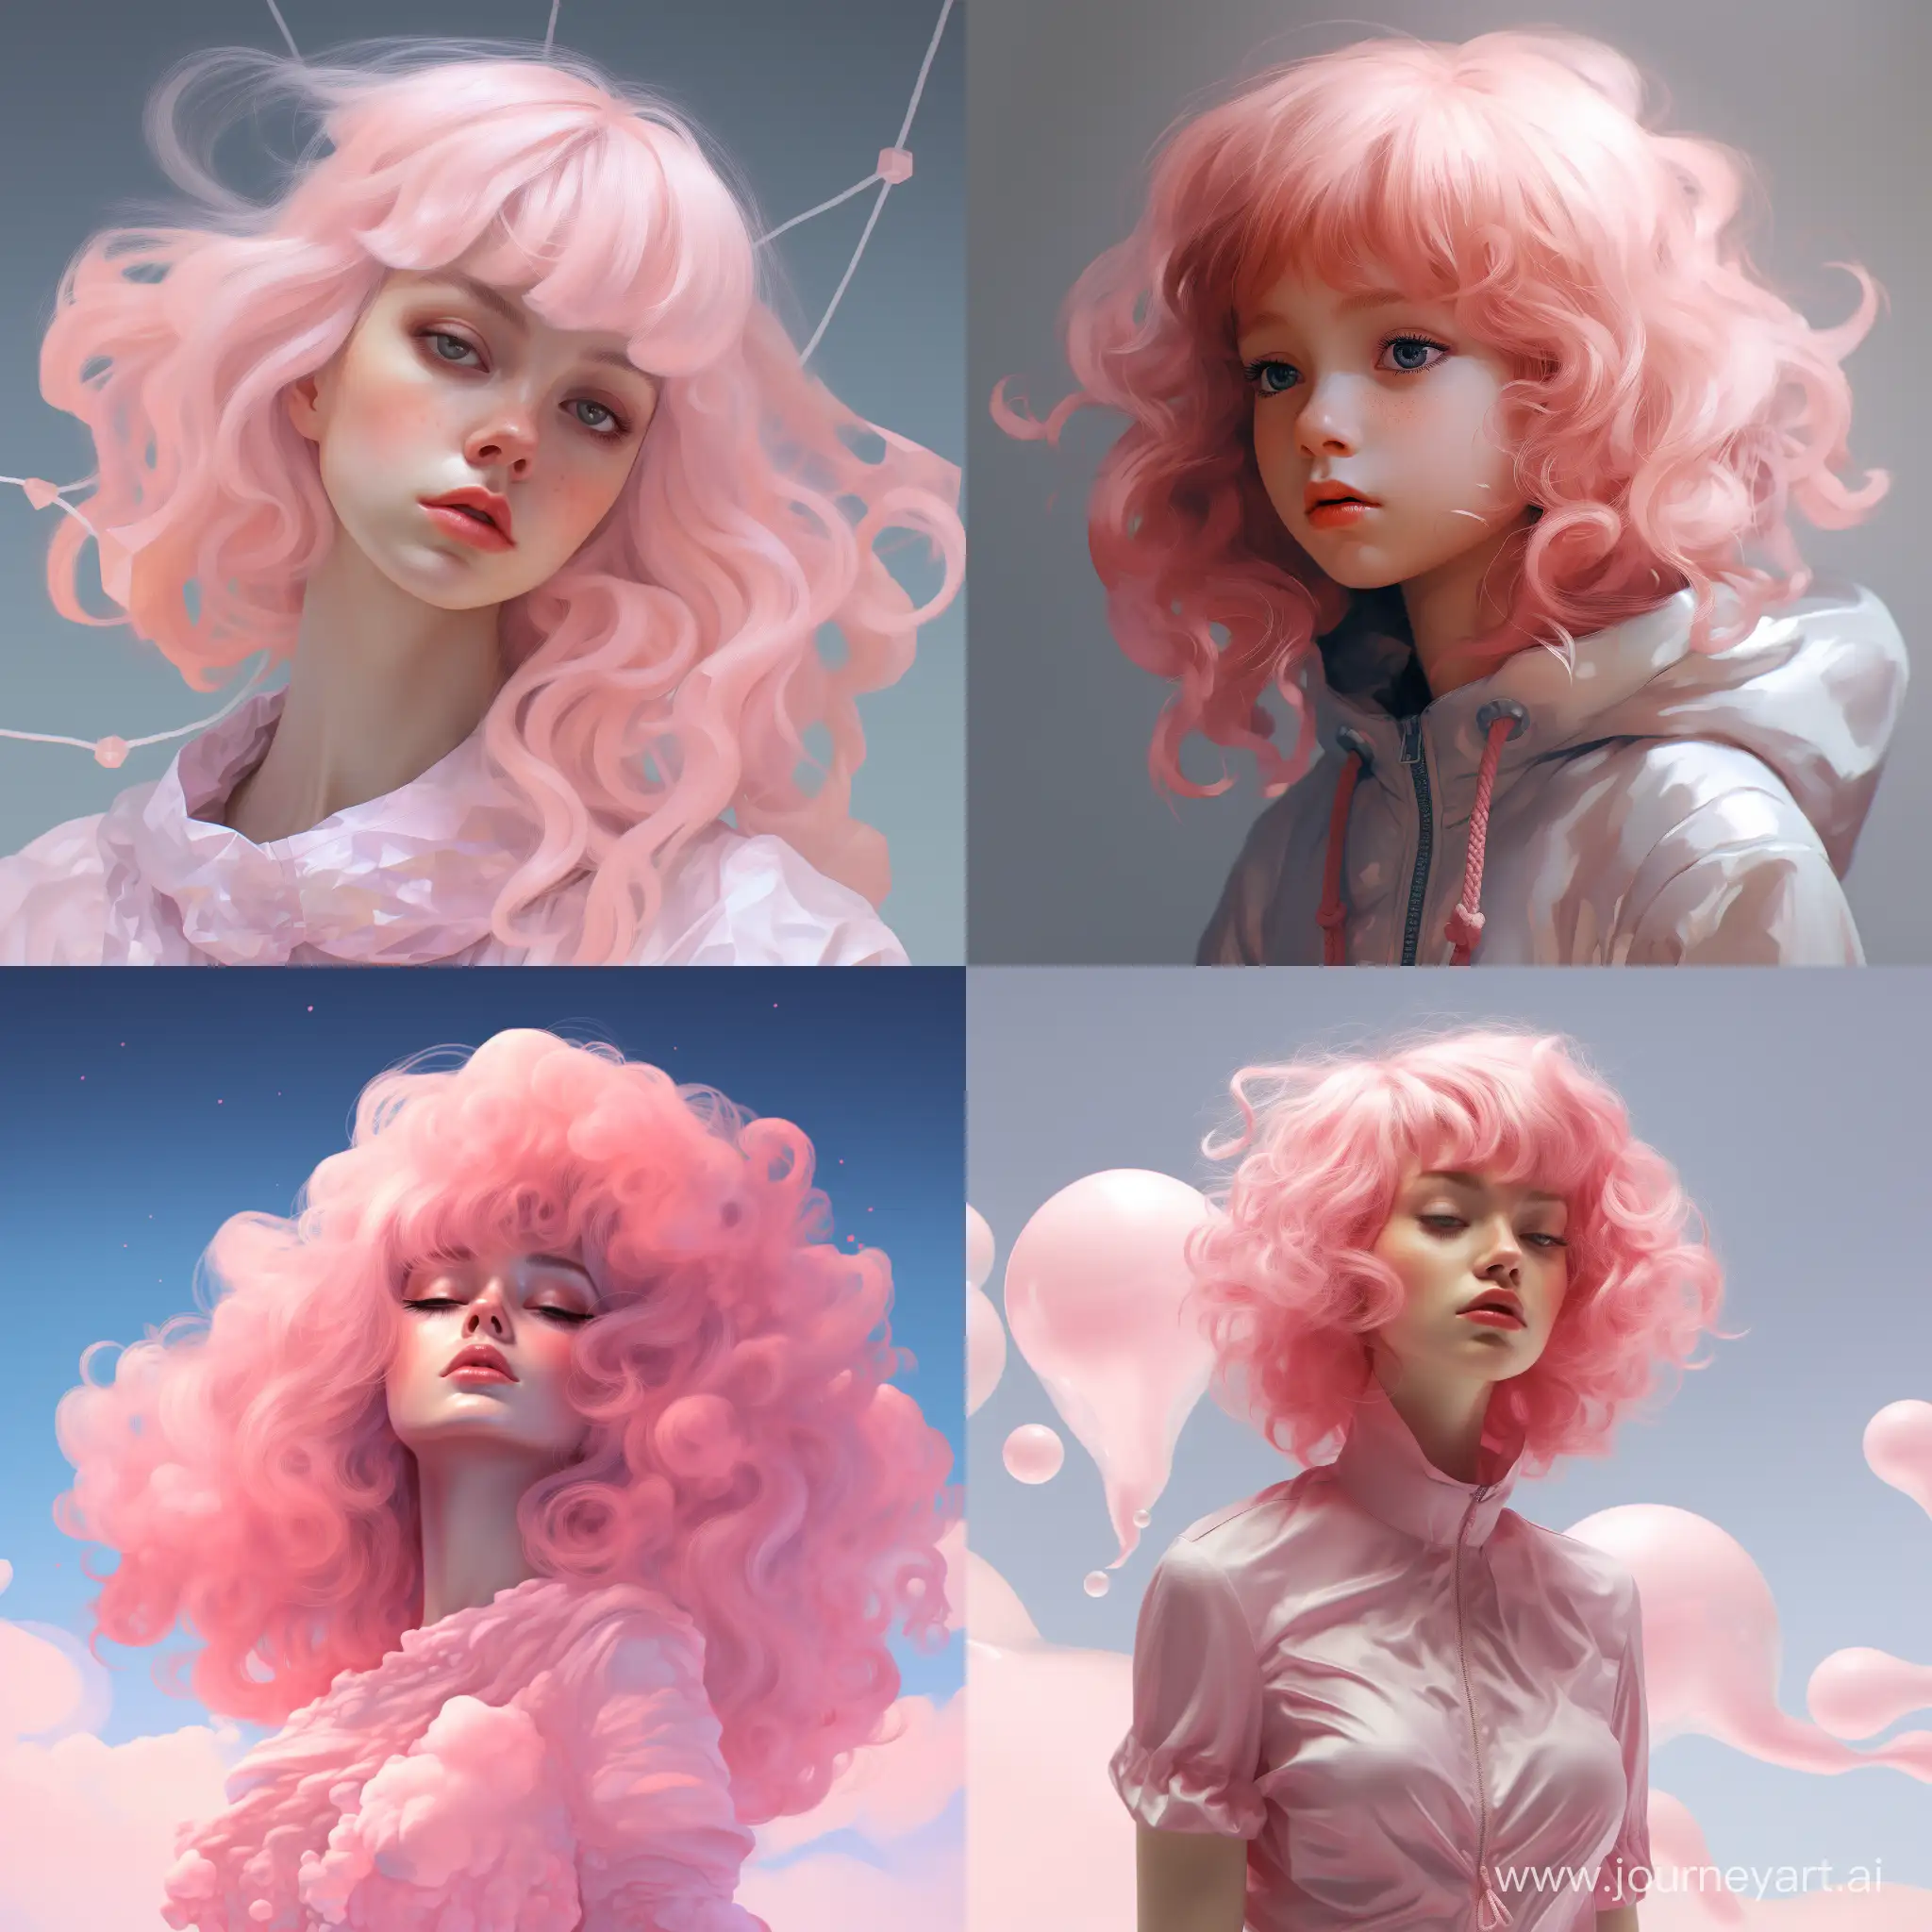 Soft-Clouds-in-Pink-Figma-Design-with-Harmonious-Tones